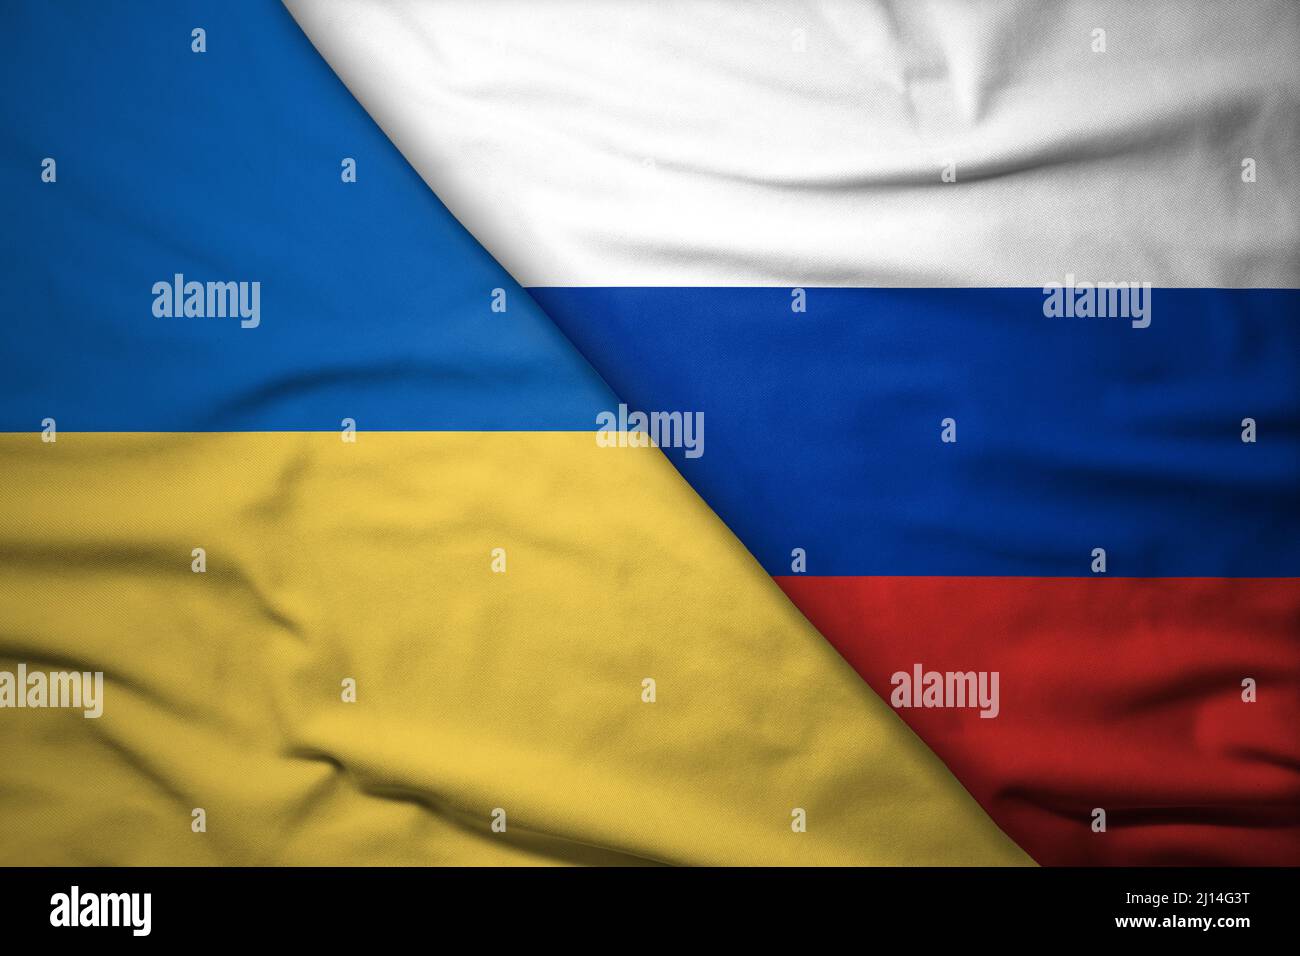 Ukrainian and Russian flags background Stock Photo